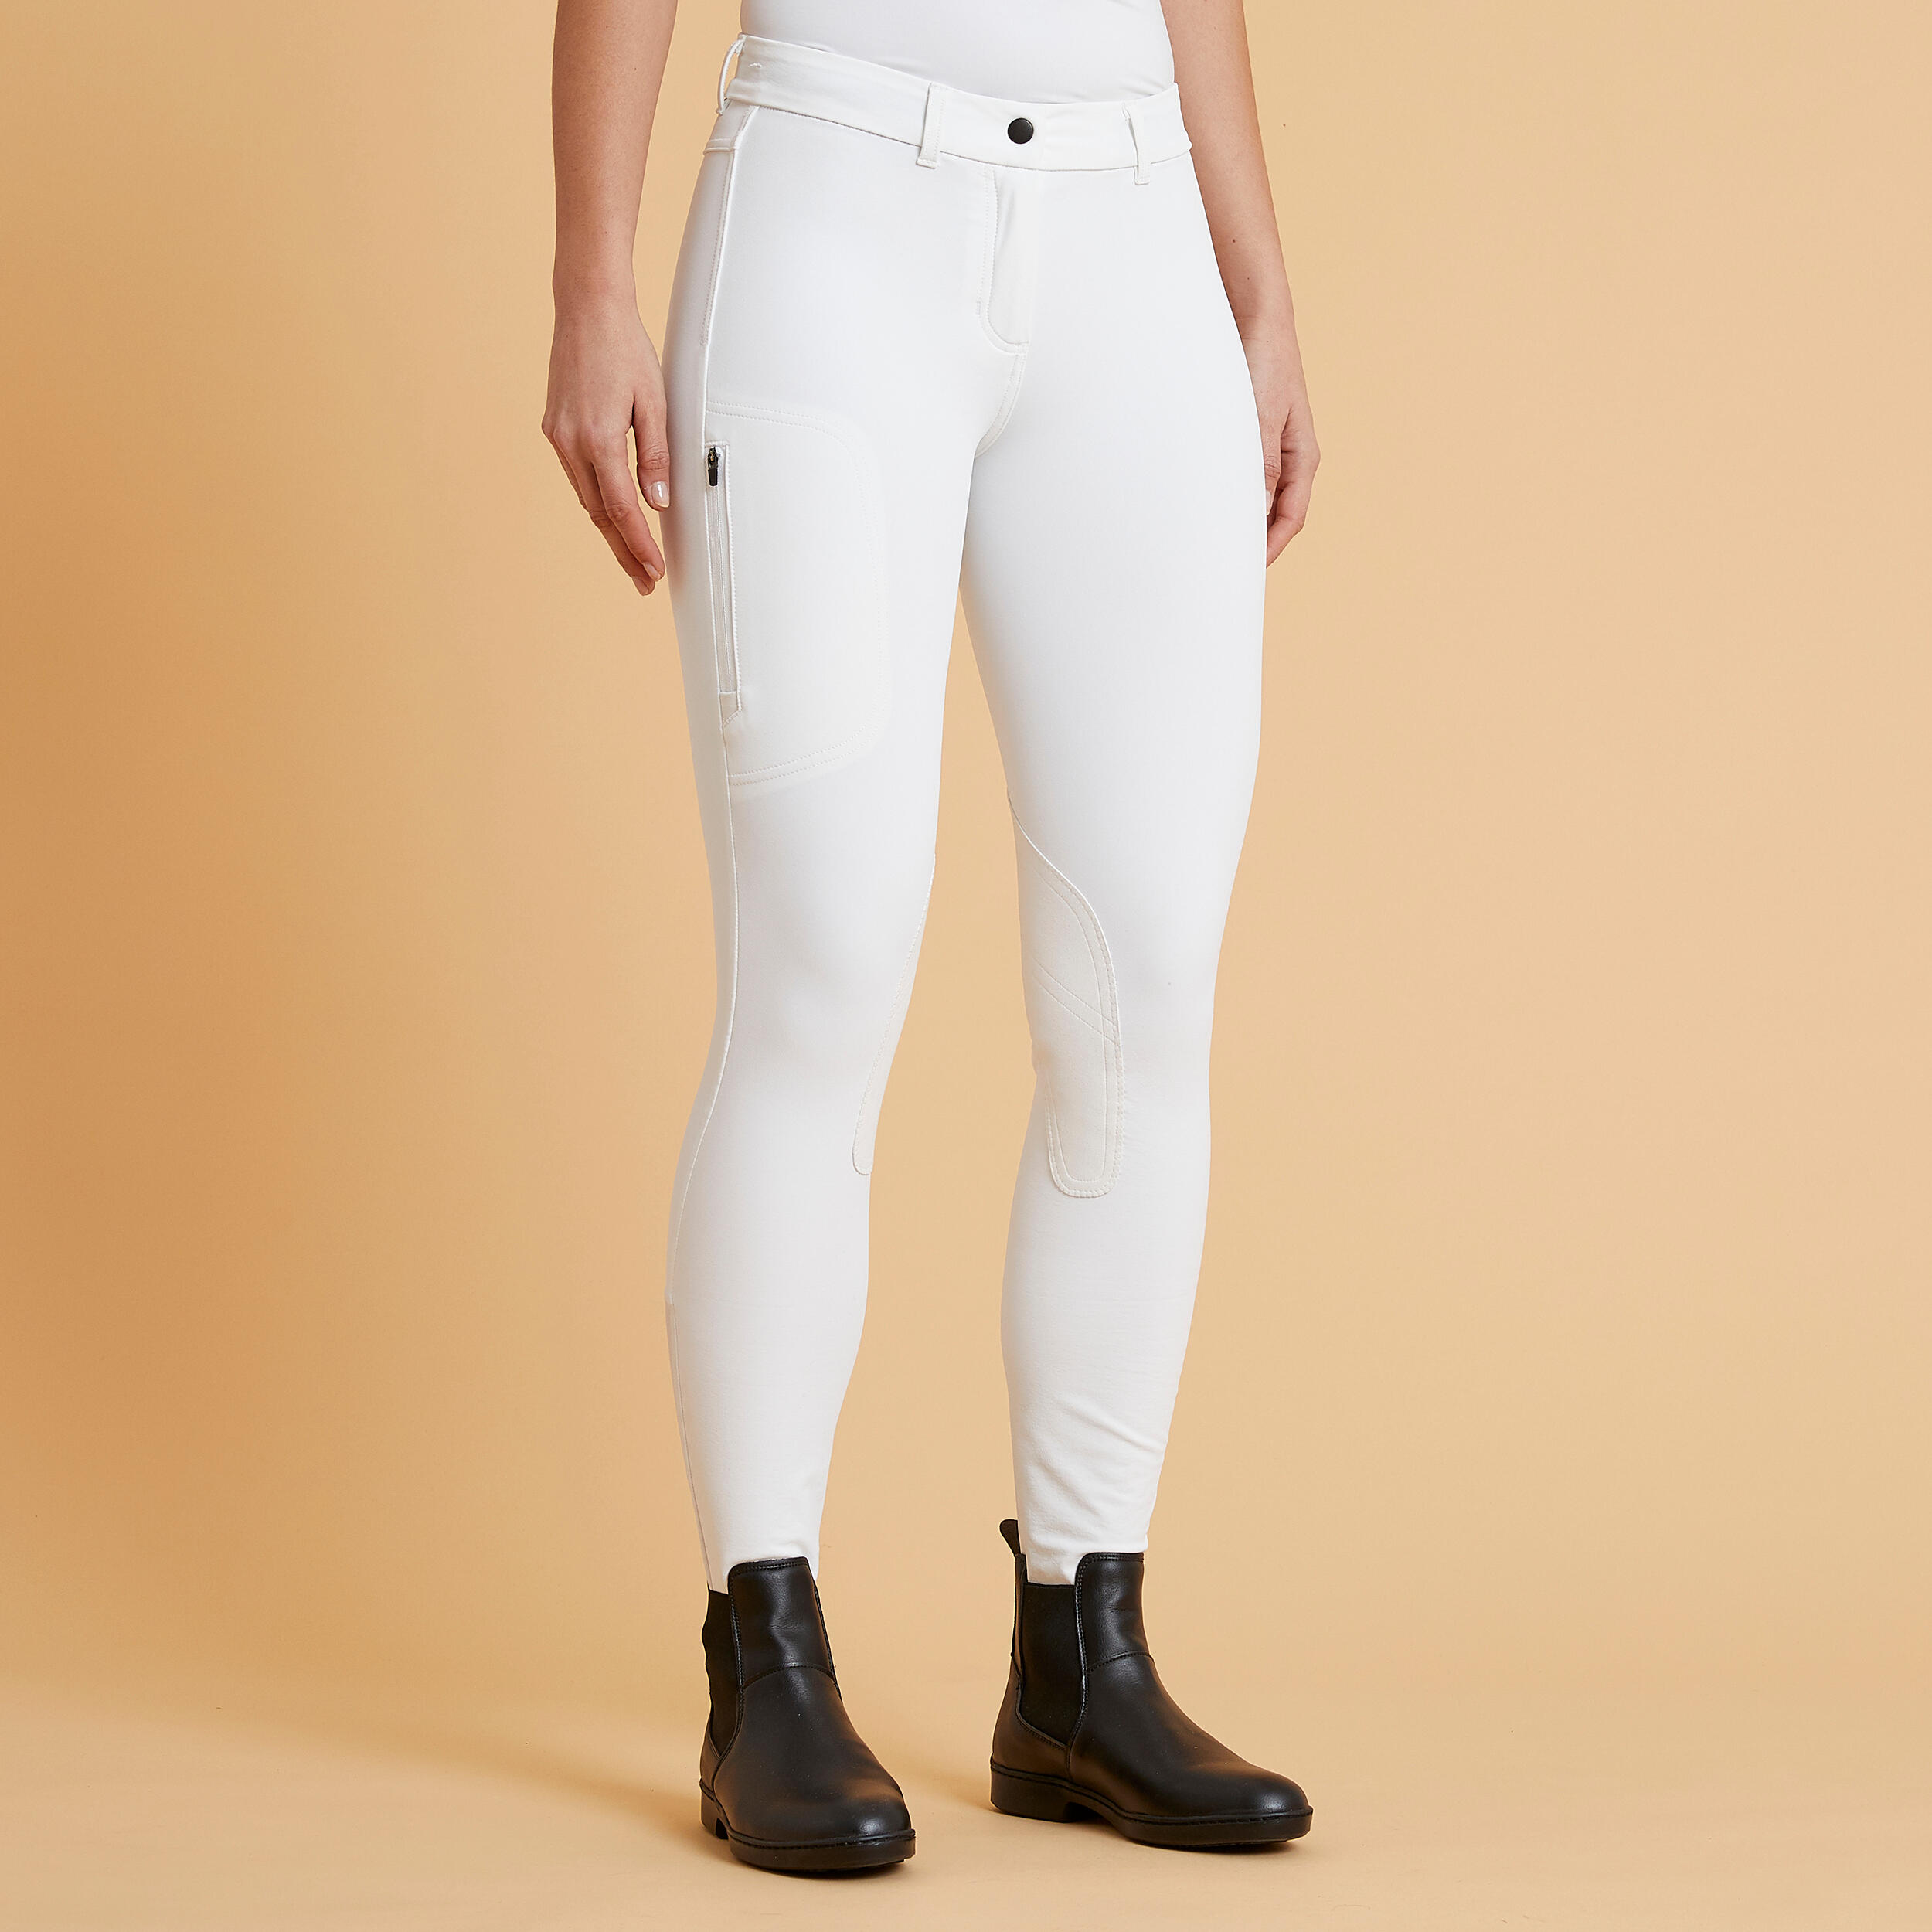 FOUGANZA 500 Women's Horse Riding Show Jodhpurs With Patches - White